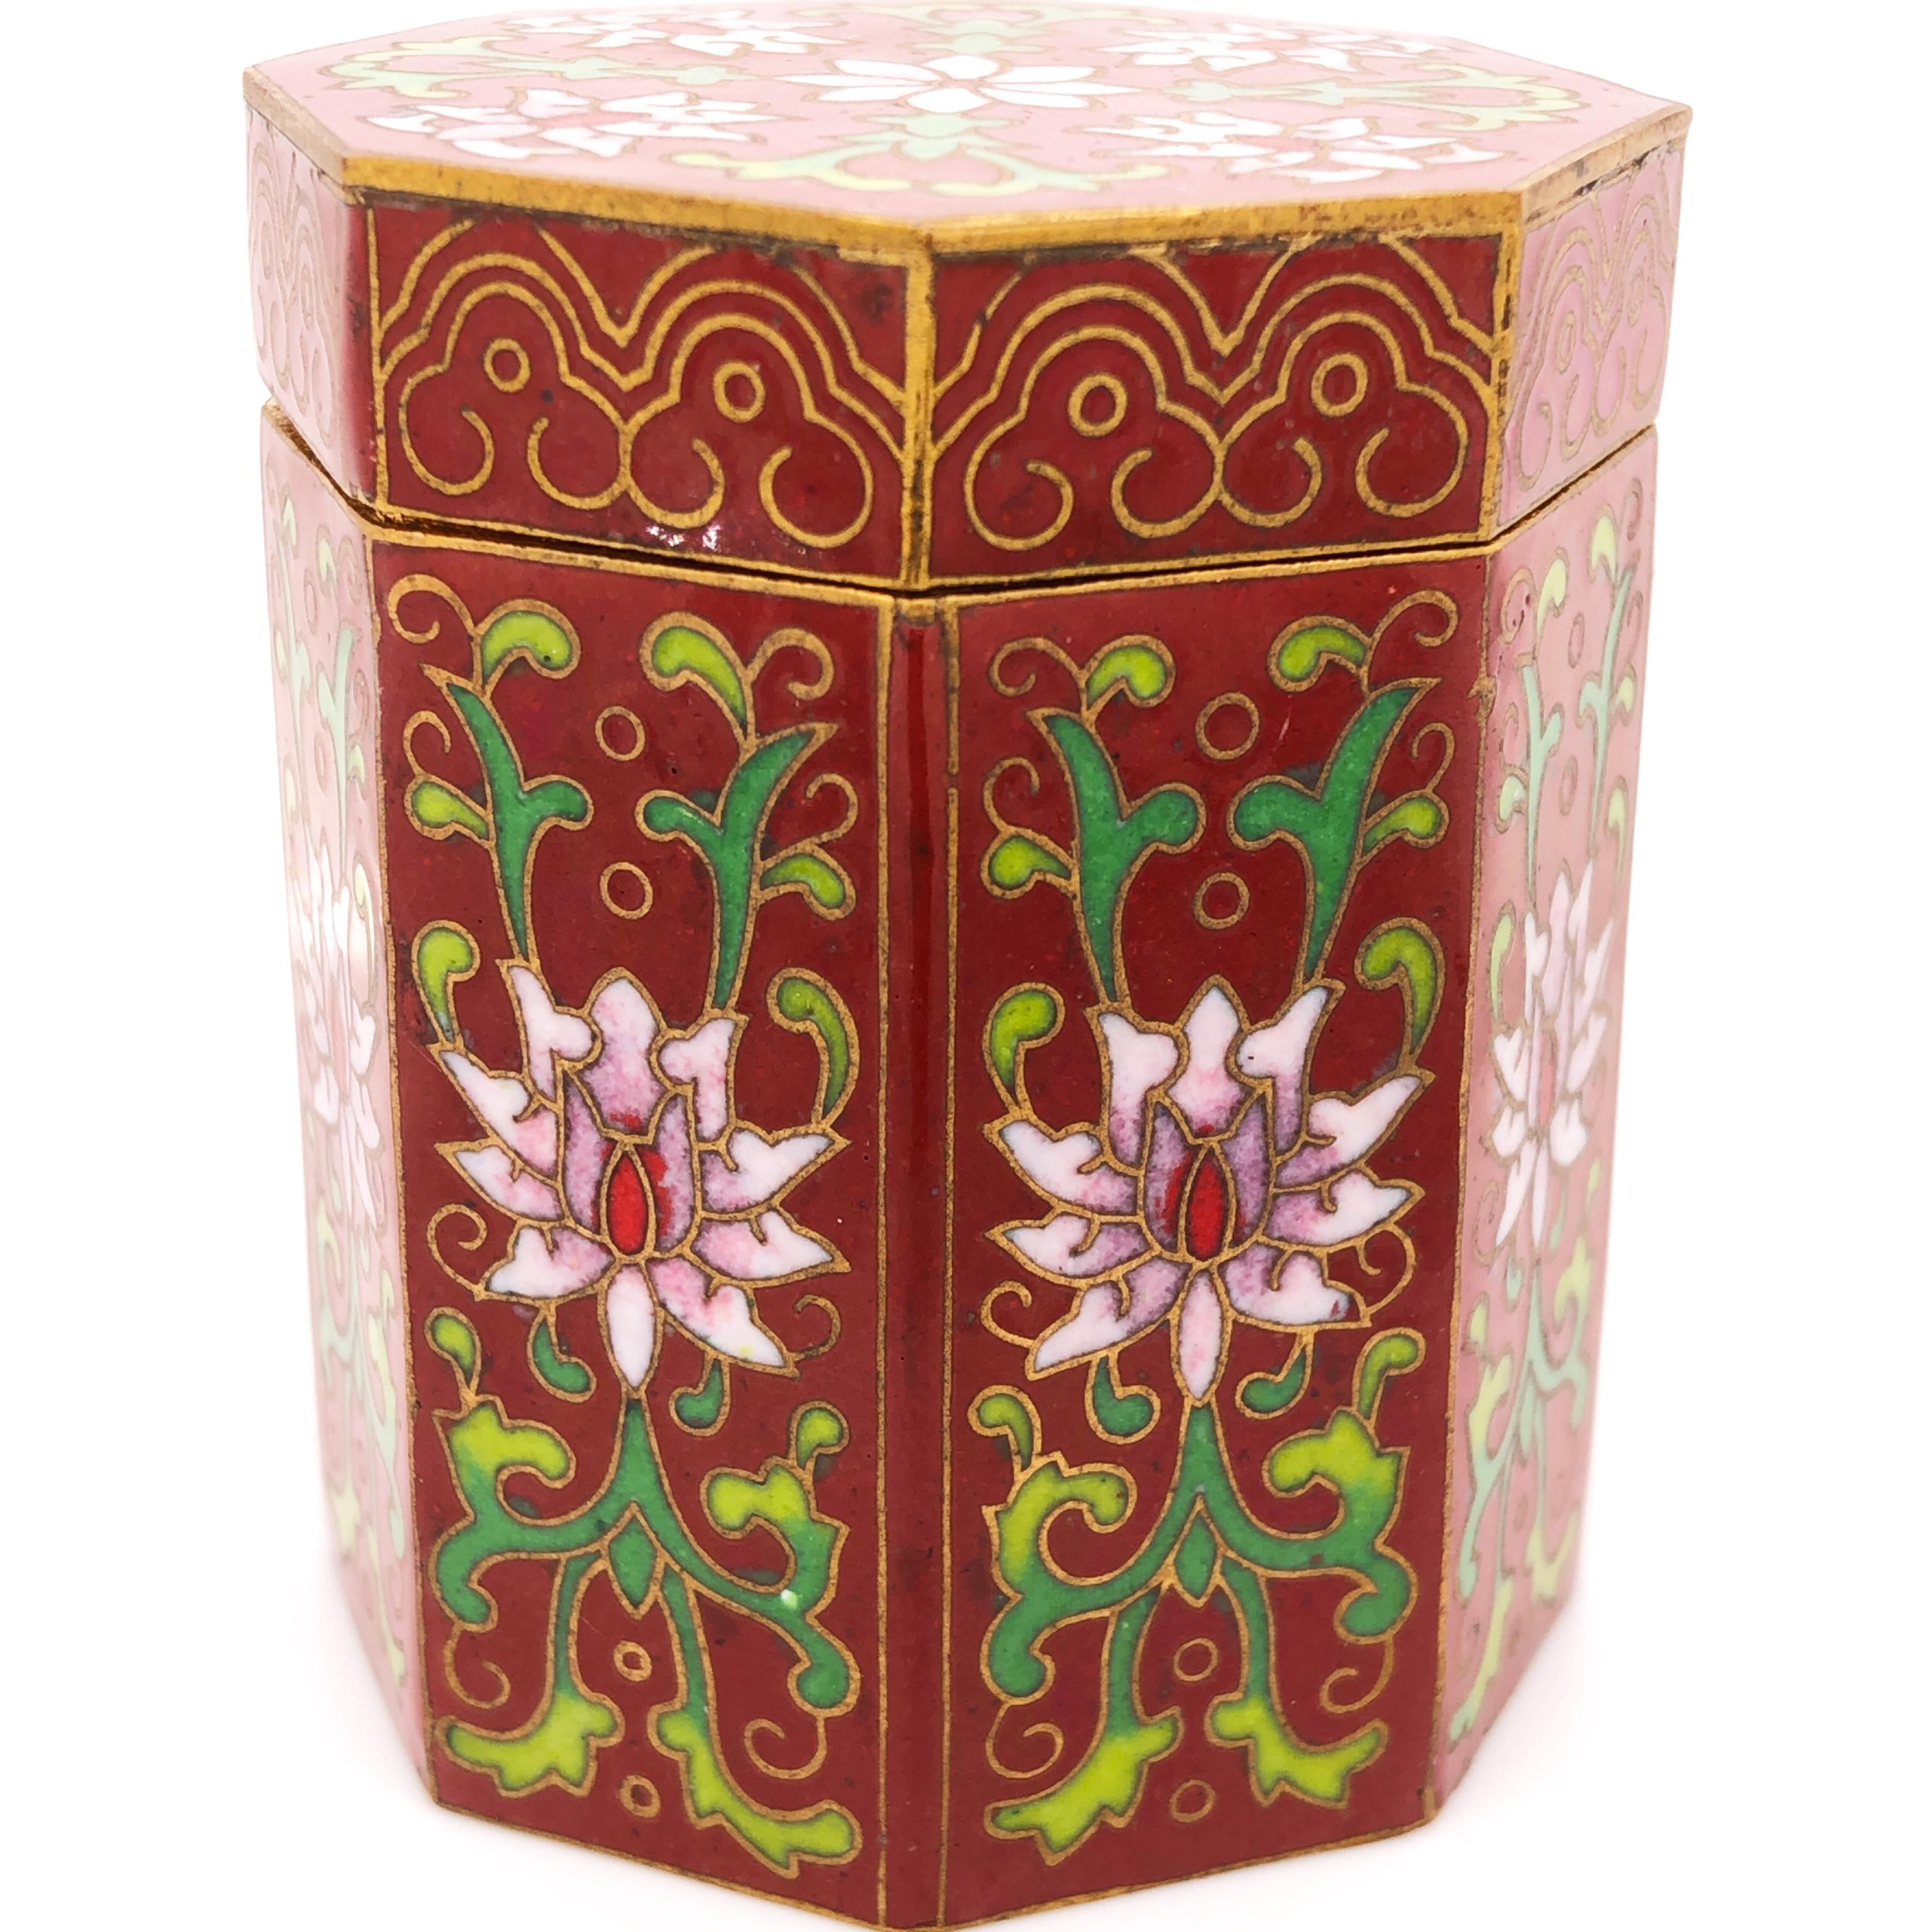 Circa 1949 Gu Yi Zhai Beijing Cloisonné Boxes Collection In Excellent Condition For Sale In Valenza, IT